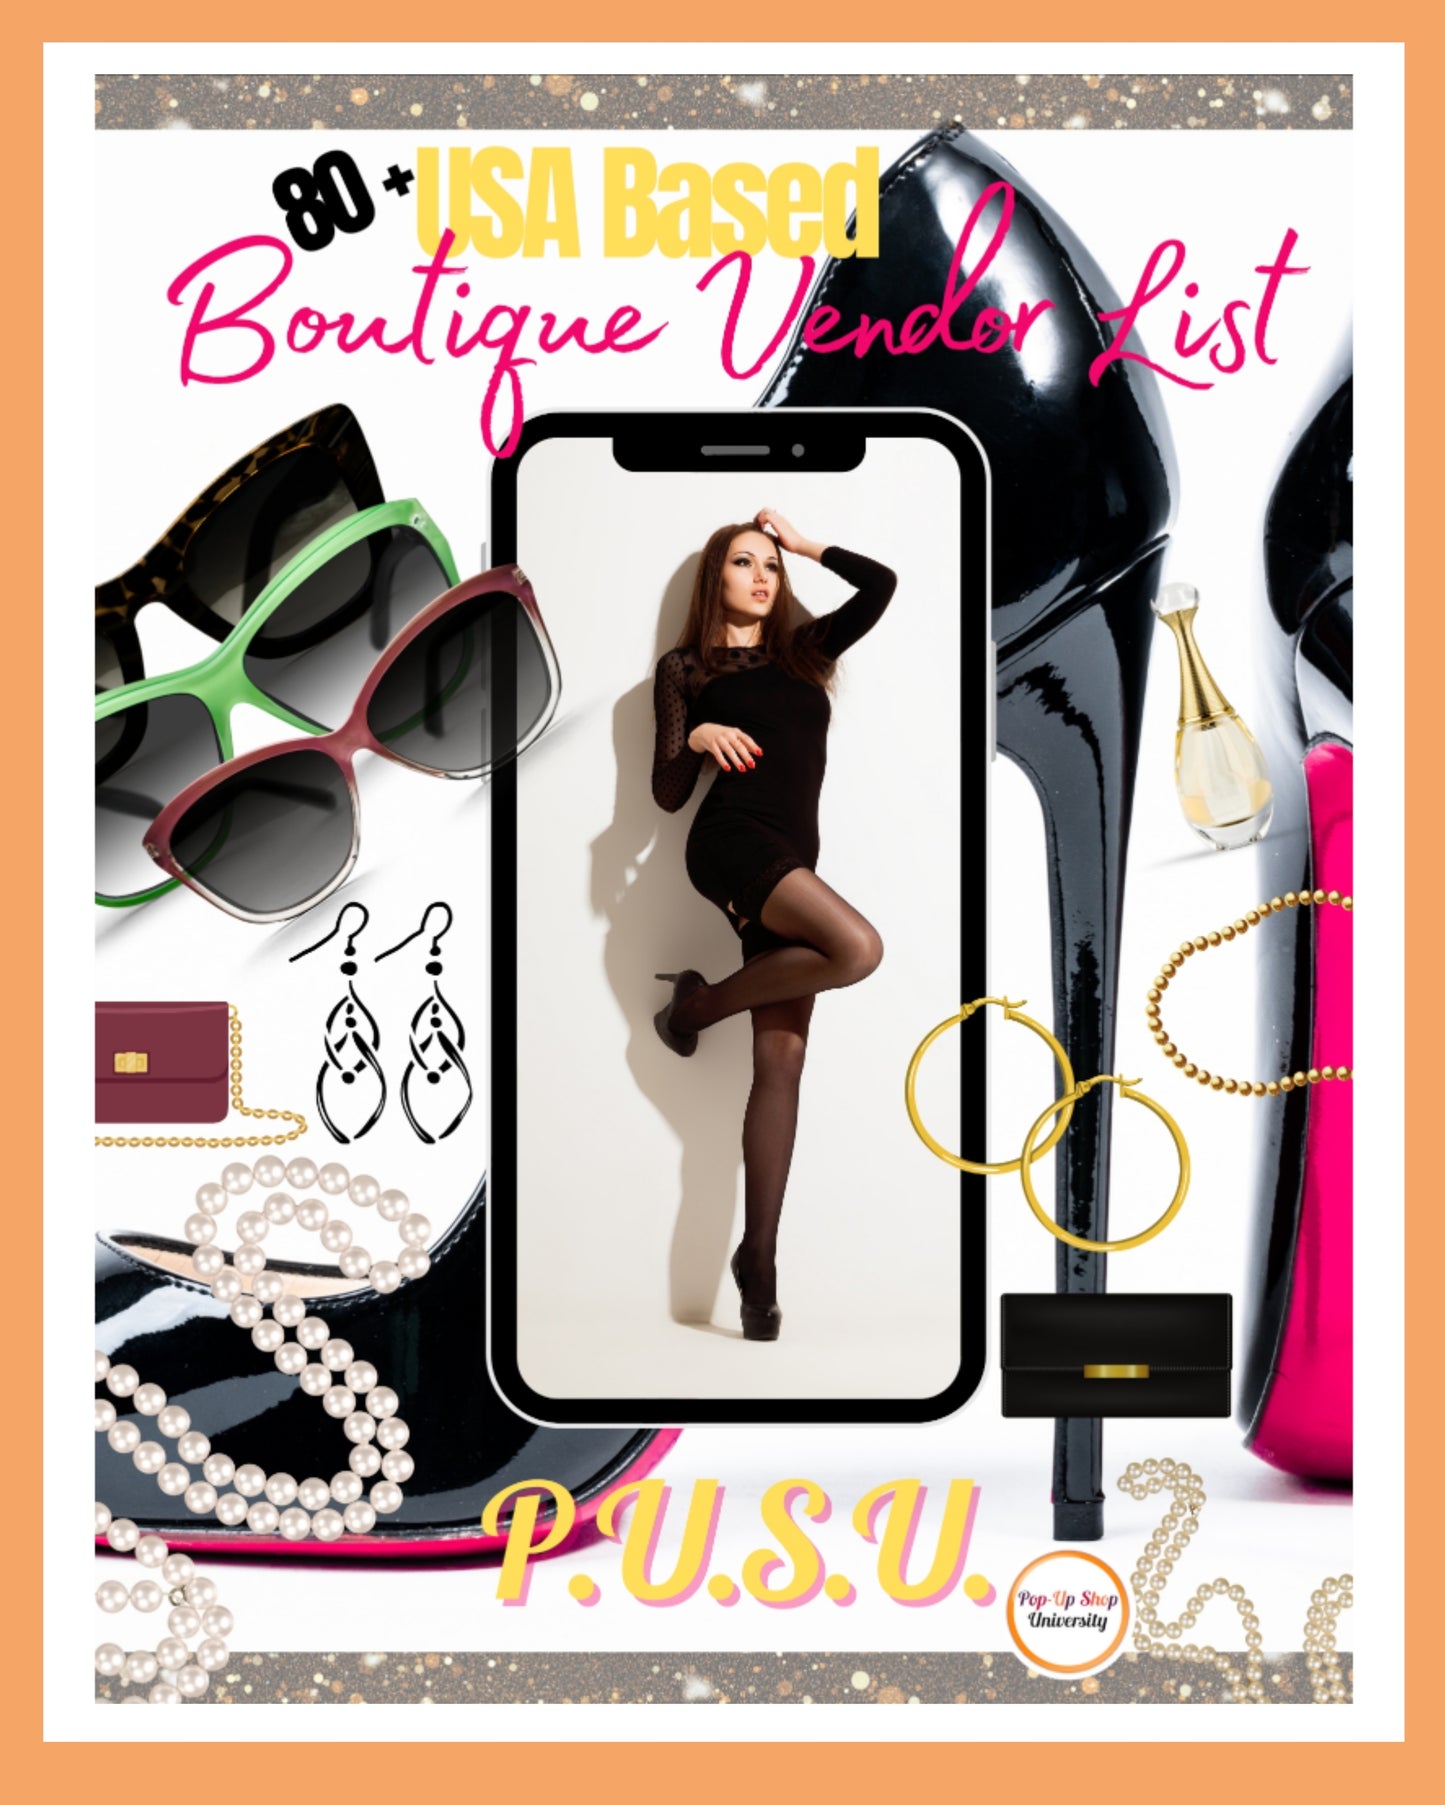 80+ USA Based Boutique Wholesale Vendor List - Immediate Access to Digital Download